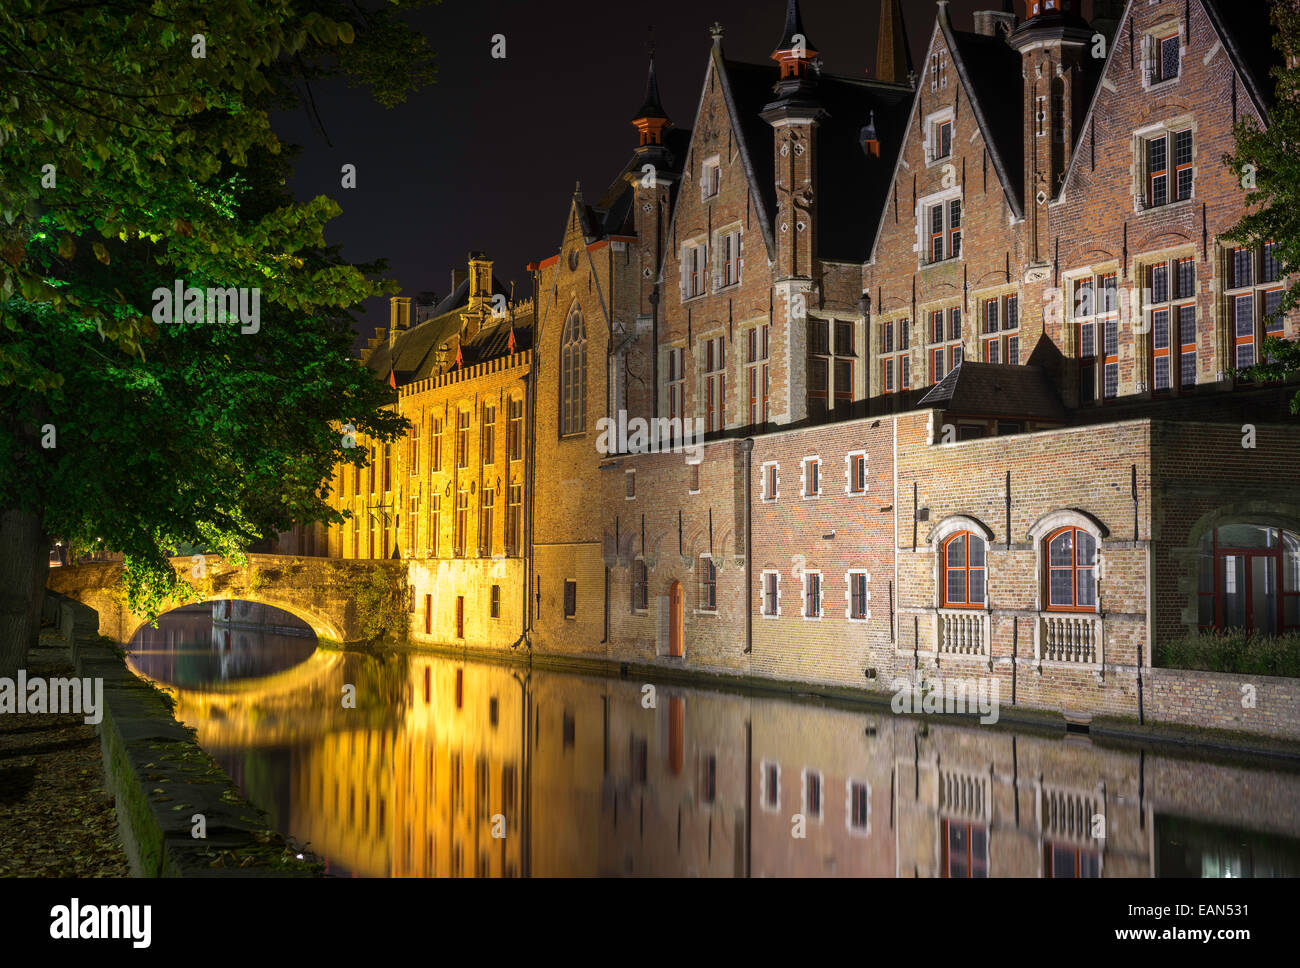 Bruges bridge and canal,floodlit at night Stock Photo